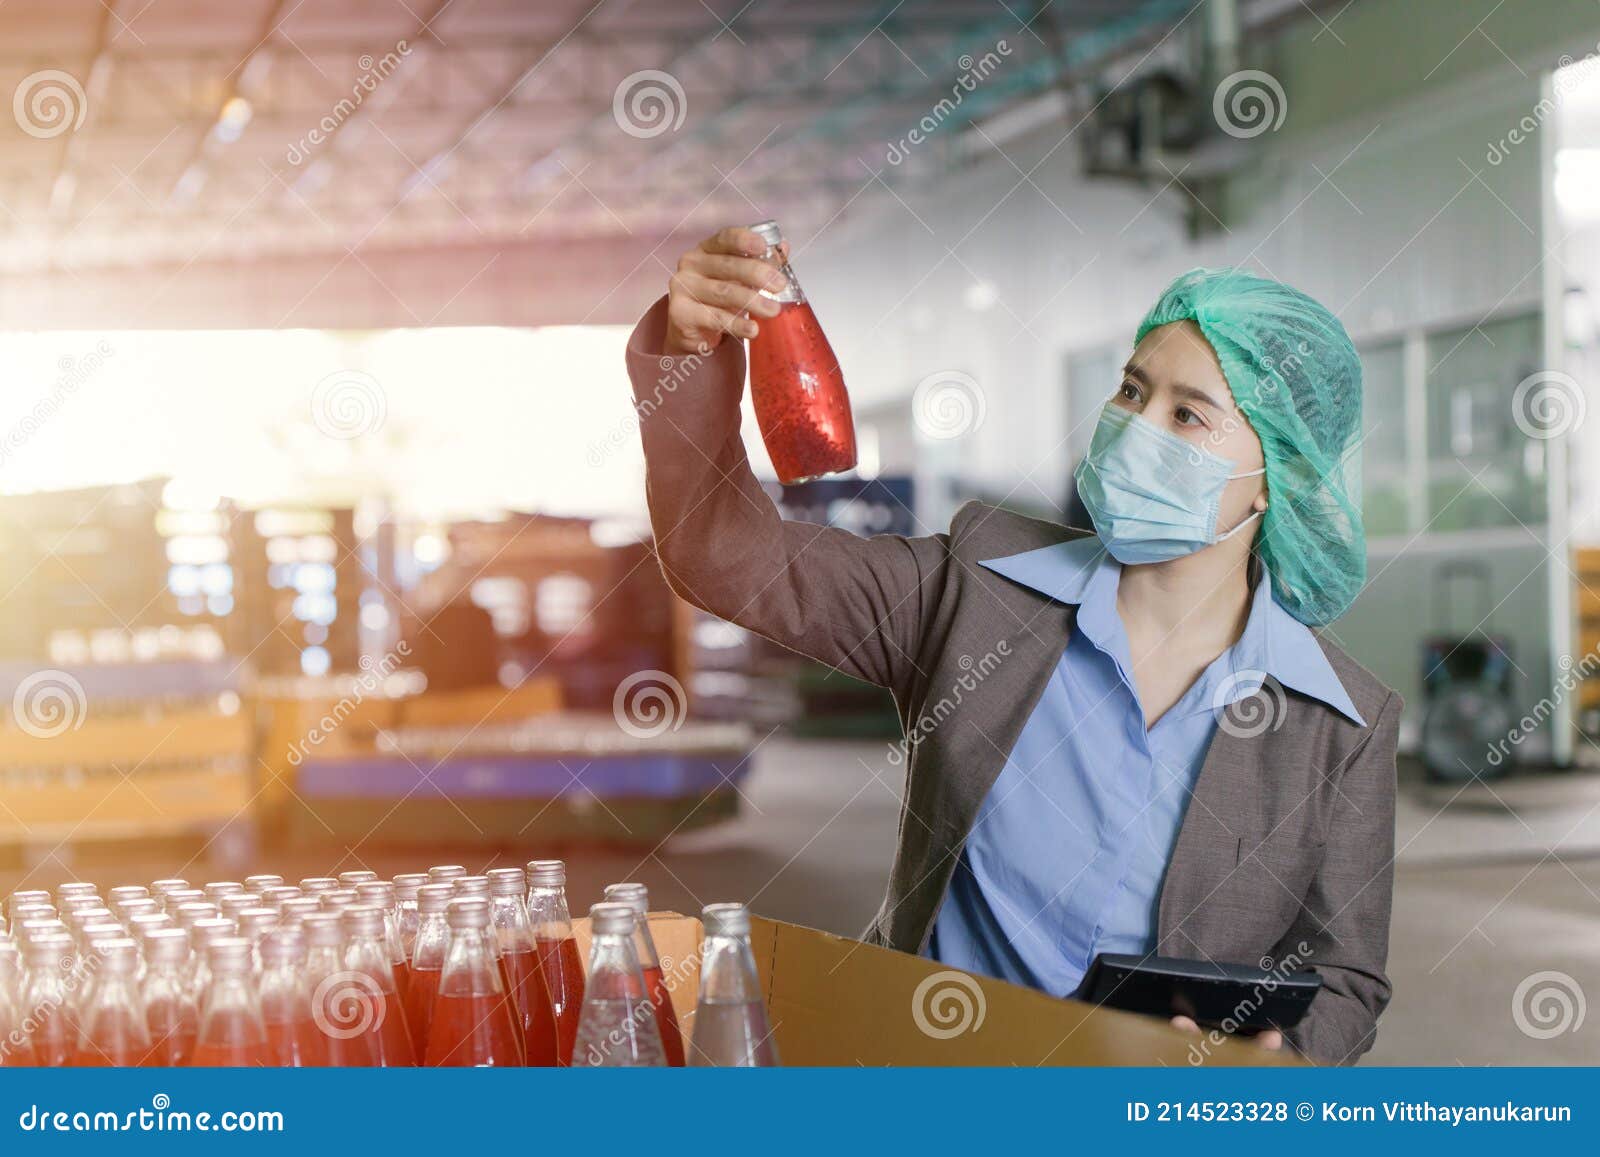 quality control inspector person working in drink factory to random check contaminate the final products